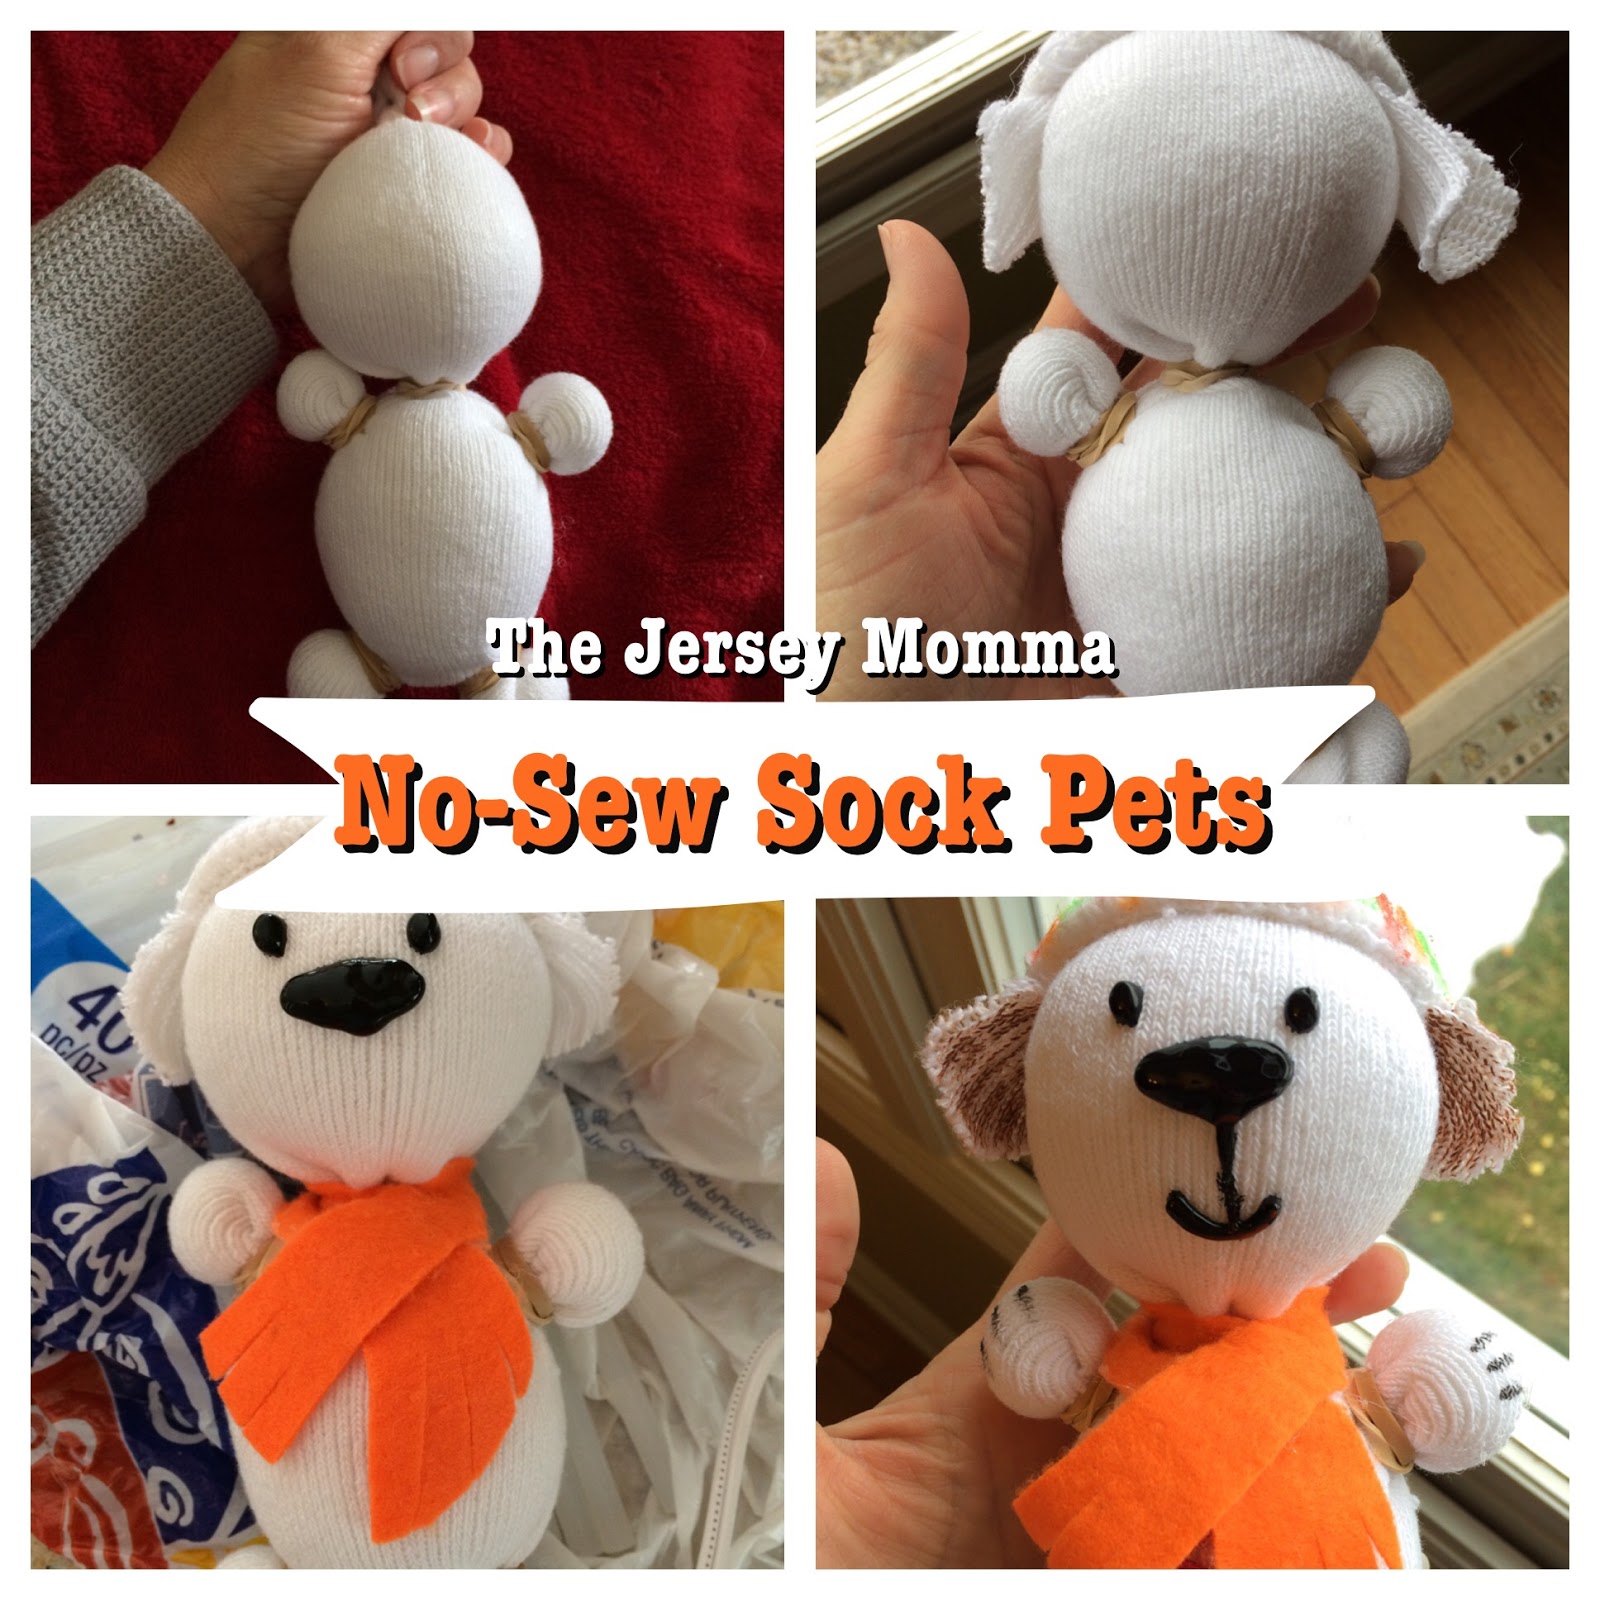 How to Make No-Sew Sock Puppets | The Jersey Momma